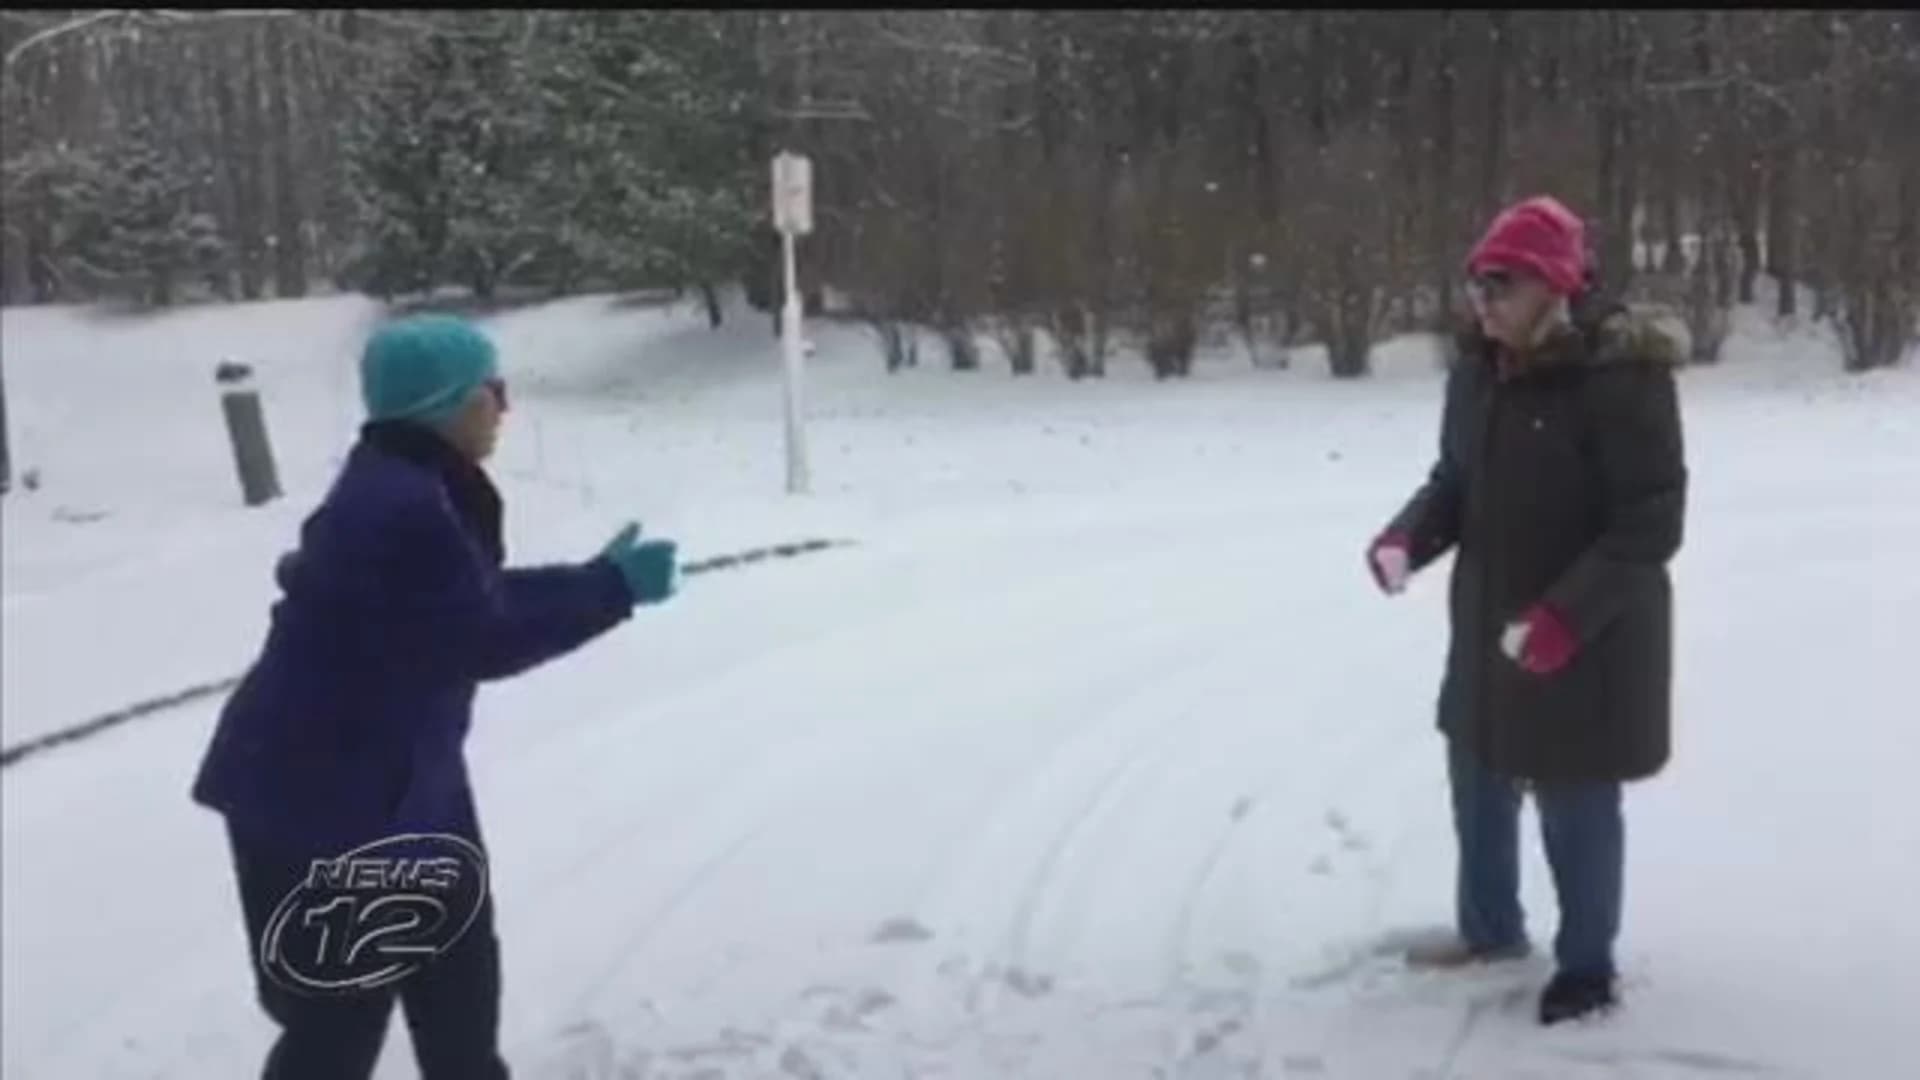 WATCH: Seniors at Brandywine Living in Princeton have snowball fight